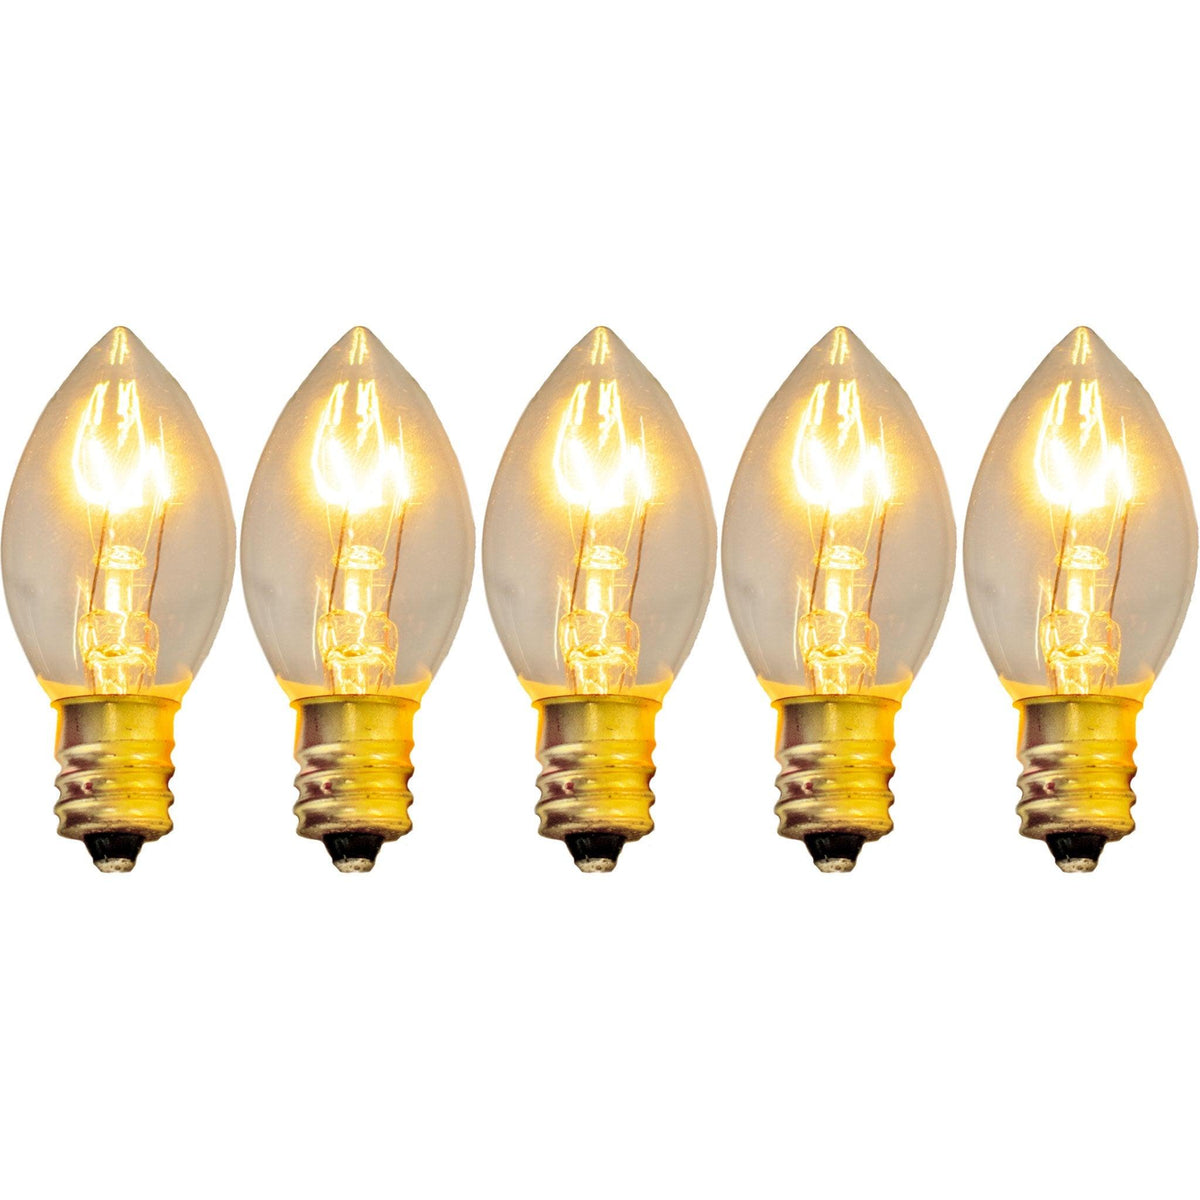 C-7 & C-9 Clear Christmas Light Bulbs.  Replace your old bulbs with a set of brand new Candelabra Lights.  On sale at leedisplay.com